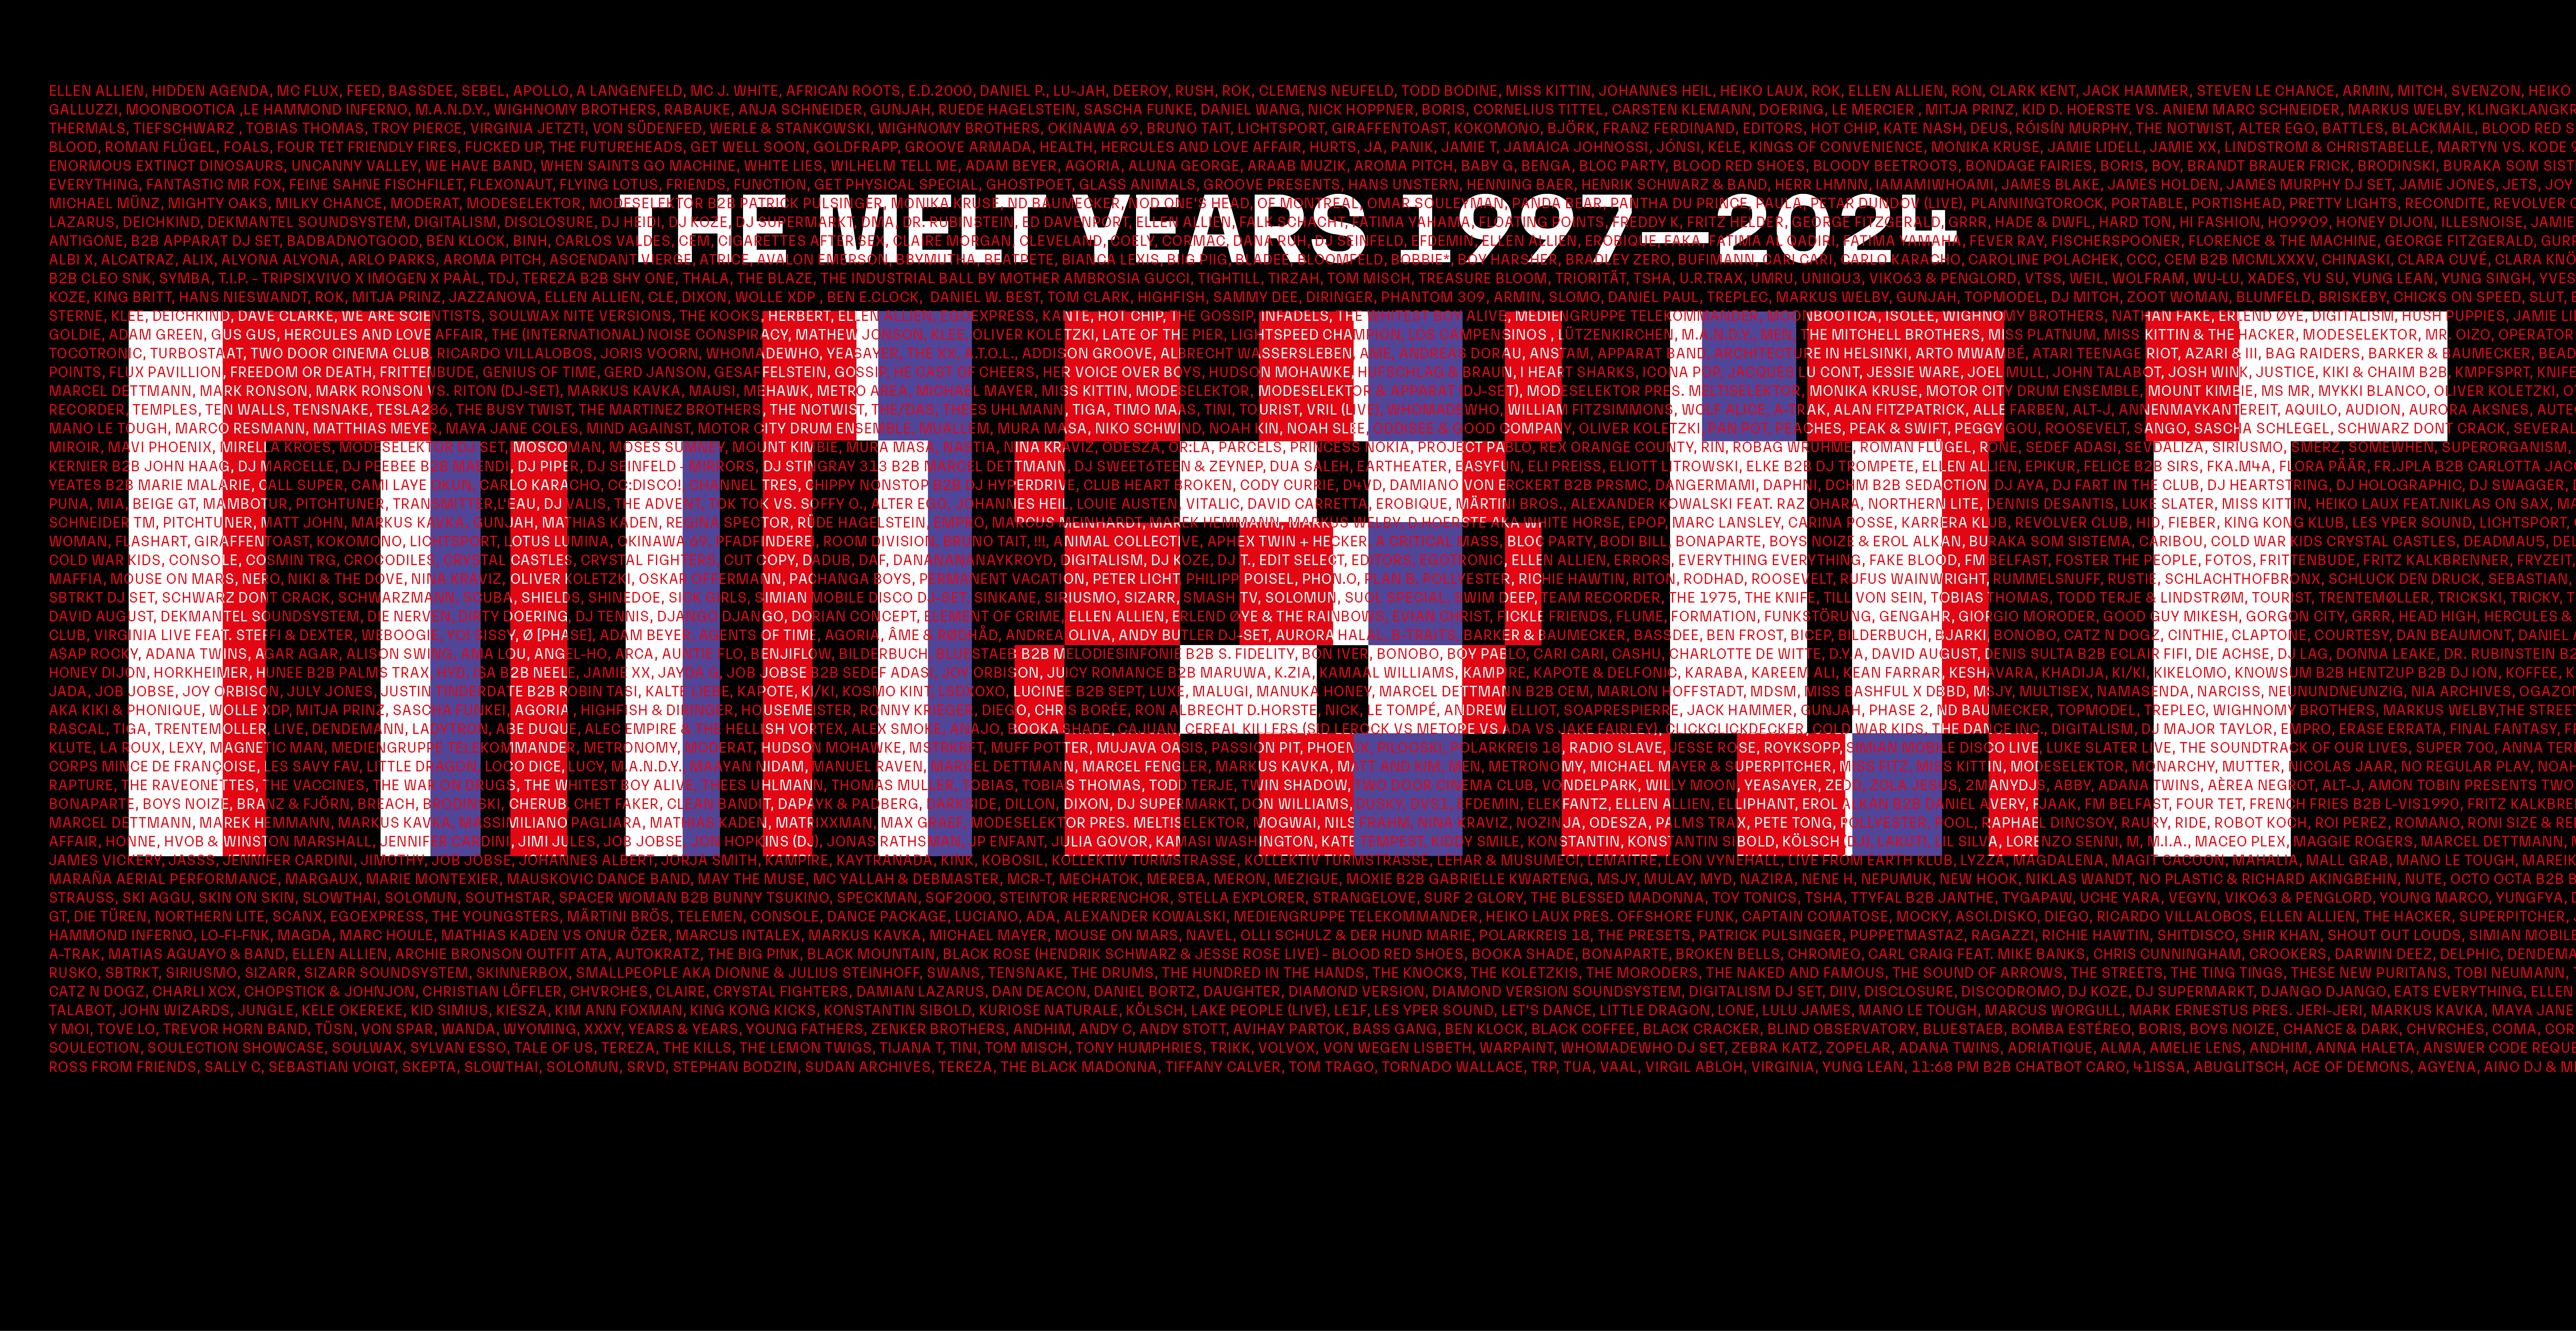 The Melt Years